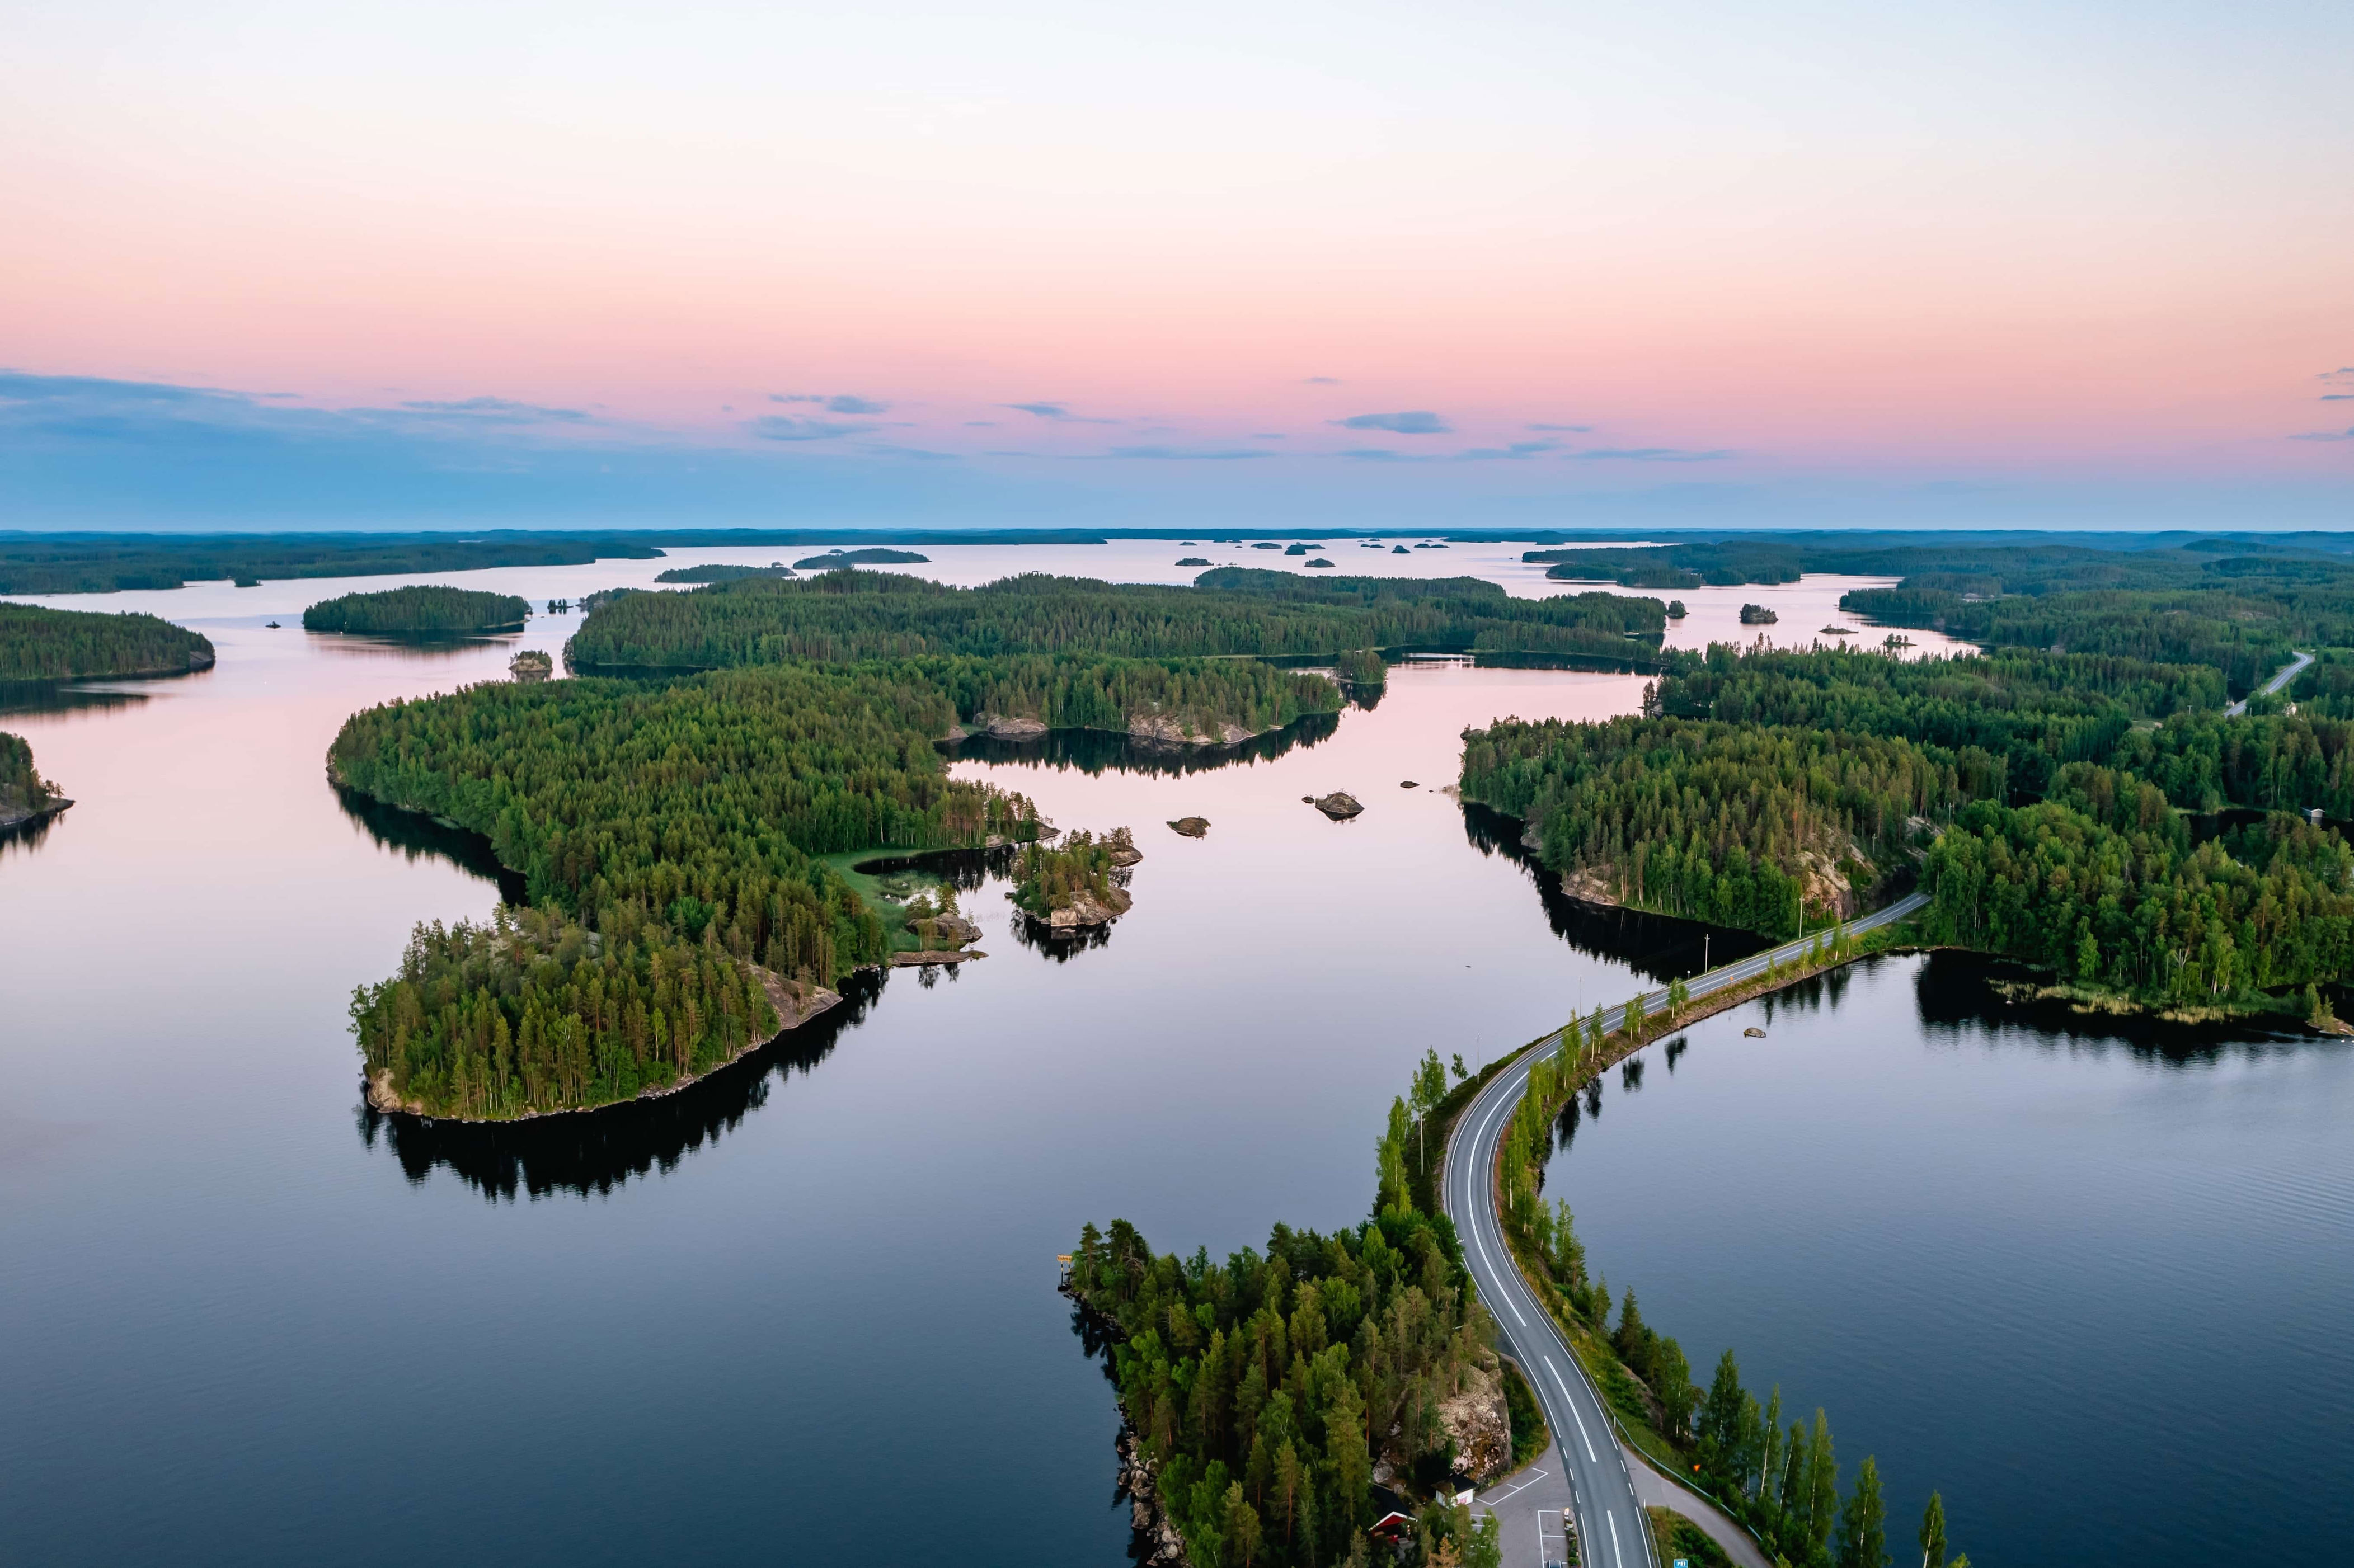 <p>Finland’s Saimaa region was awarded the title of <a href="https://www.tastesaimaa.fi/saimaa-european-region-of-gastronomy#:~:text=The%20Saimaa%20region%20has%20been,Lakeland%20with%20all%20their%20senses.">European Region of Gastronomy 2024</a> to celebrate the area’s unique food culture. Saimaa is Finland’s largest lake, has the world’s longest lake coastline, and boasts an incredible 13,710 islands. When it comes to food, the freshwater <a href="https://www.visitsaimaa.fi/en/finnish-fast-food-fried-vendace/">vendace fish</a> is a specialty in the region, while the sweet or savoury <em>l</em><em>örtsy</em> pastries are best enjoyed from the Savonlinna Market Square. From kayaking through the maze-like island chains to experiencing a traditional wood-heated sauna, there’s plenty to do in this enchanting destination.</p>